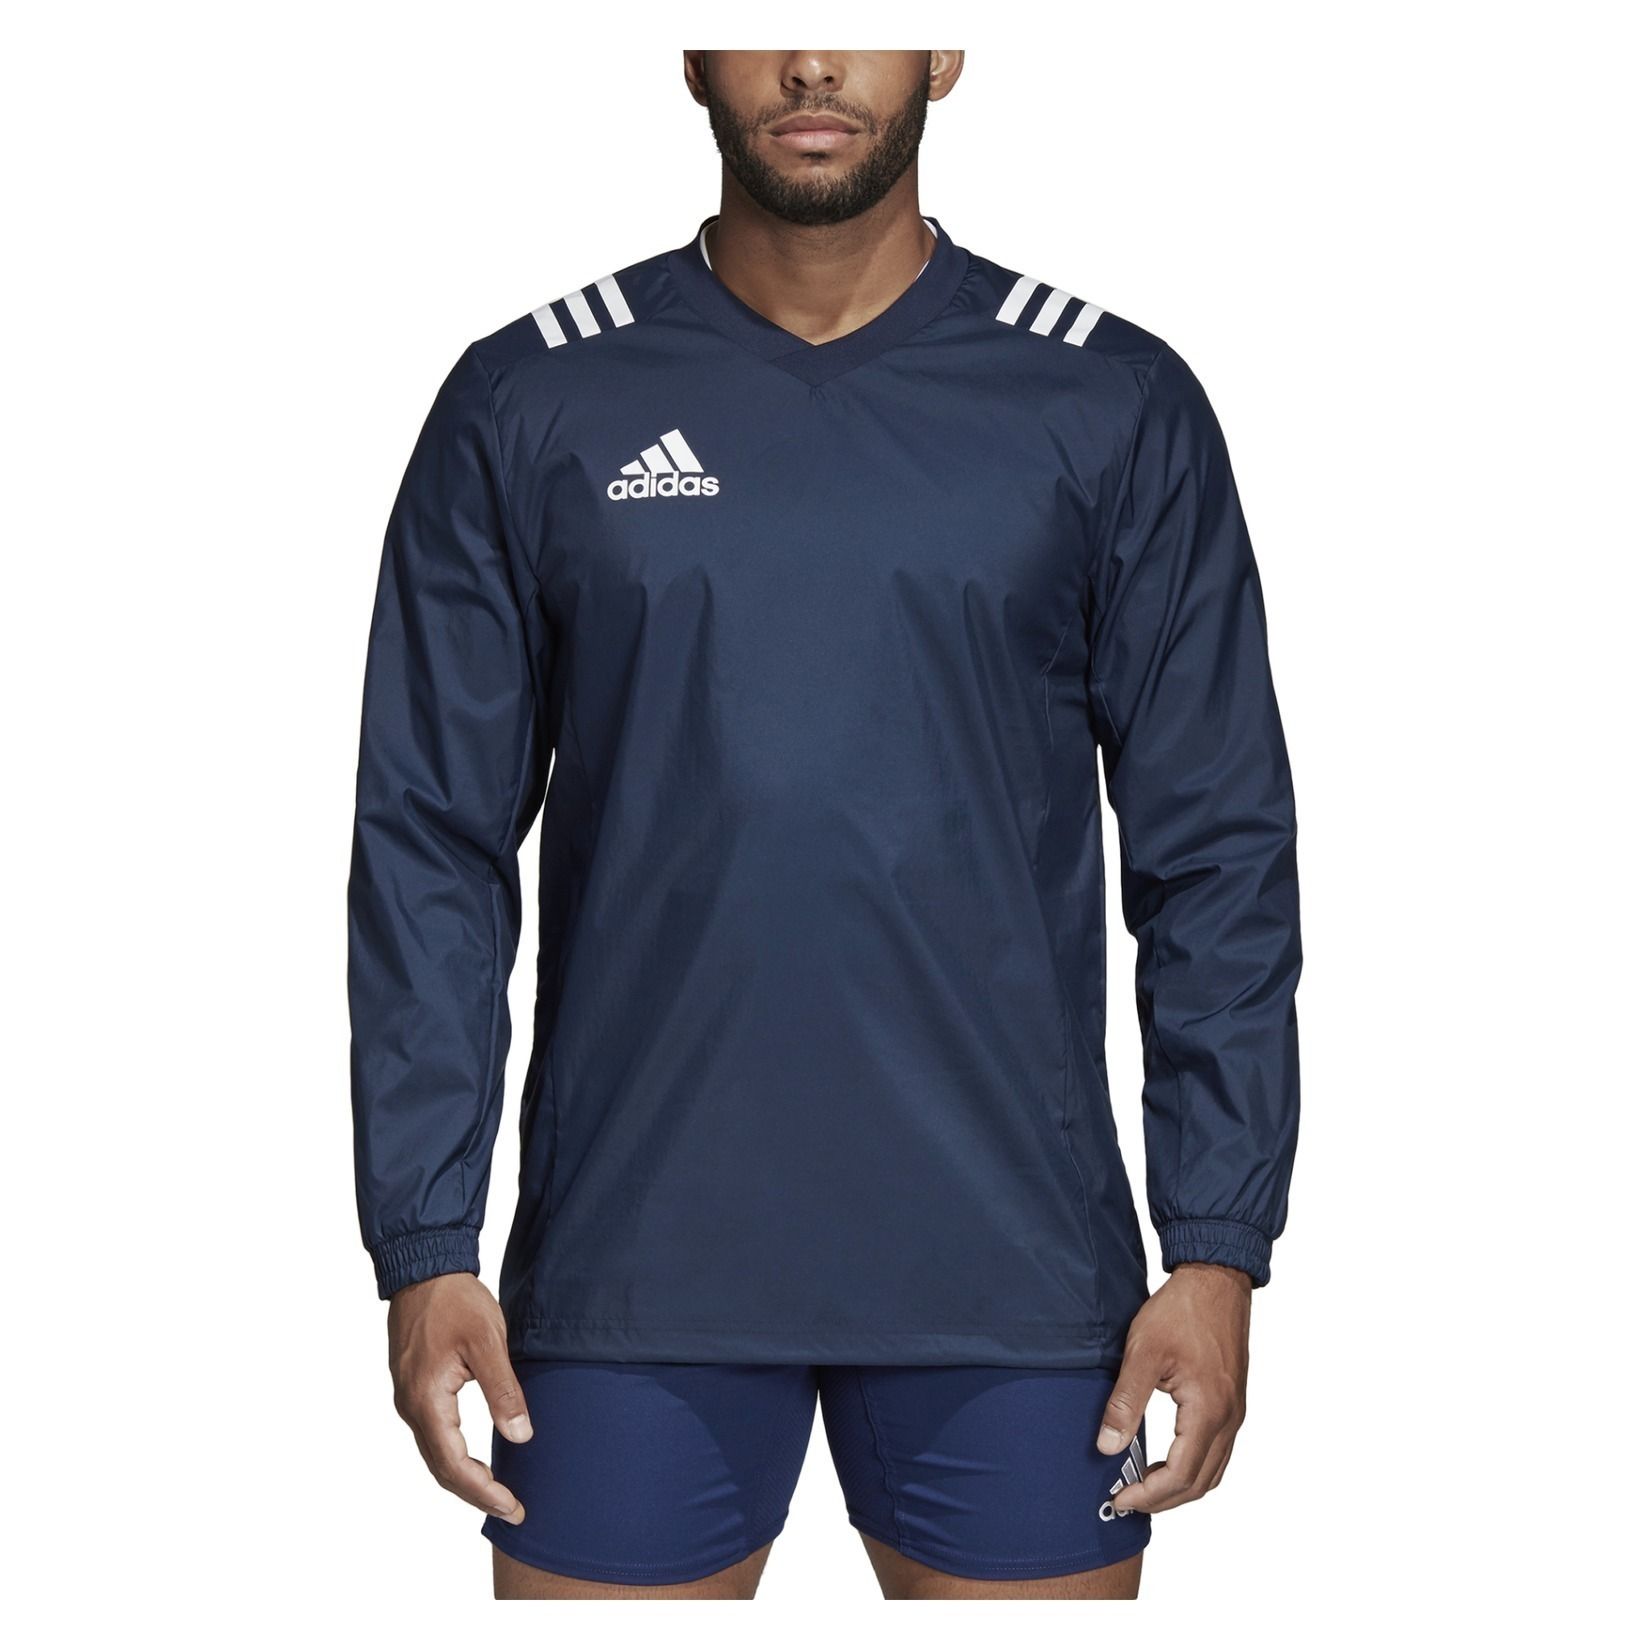 adidas rugby top